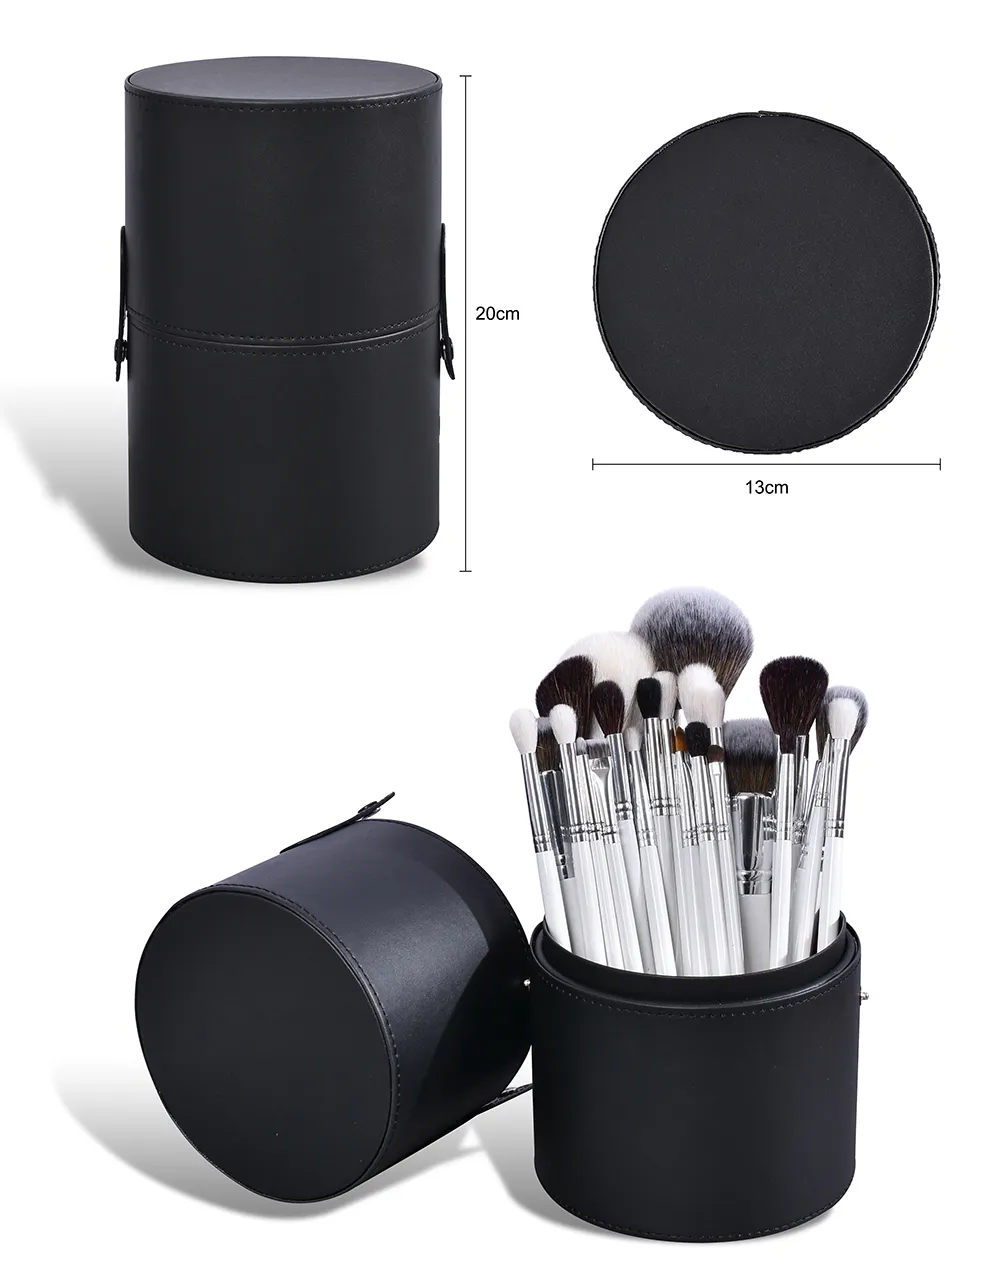 BUEYA 30 pieces White color goat Professional Artist Makeup Brush Set Make up Academy School Natural hair cosmetic Brush set